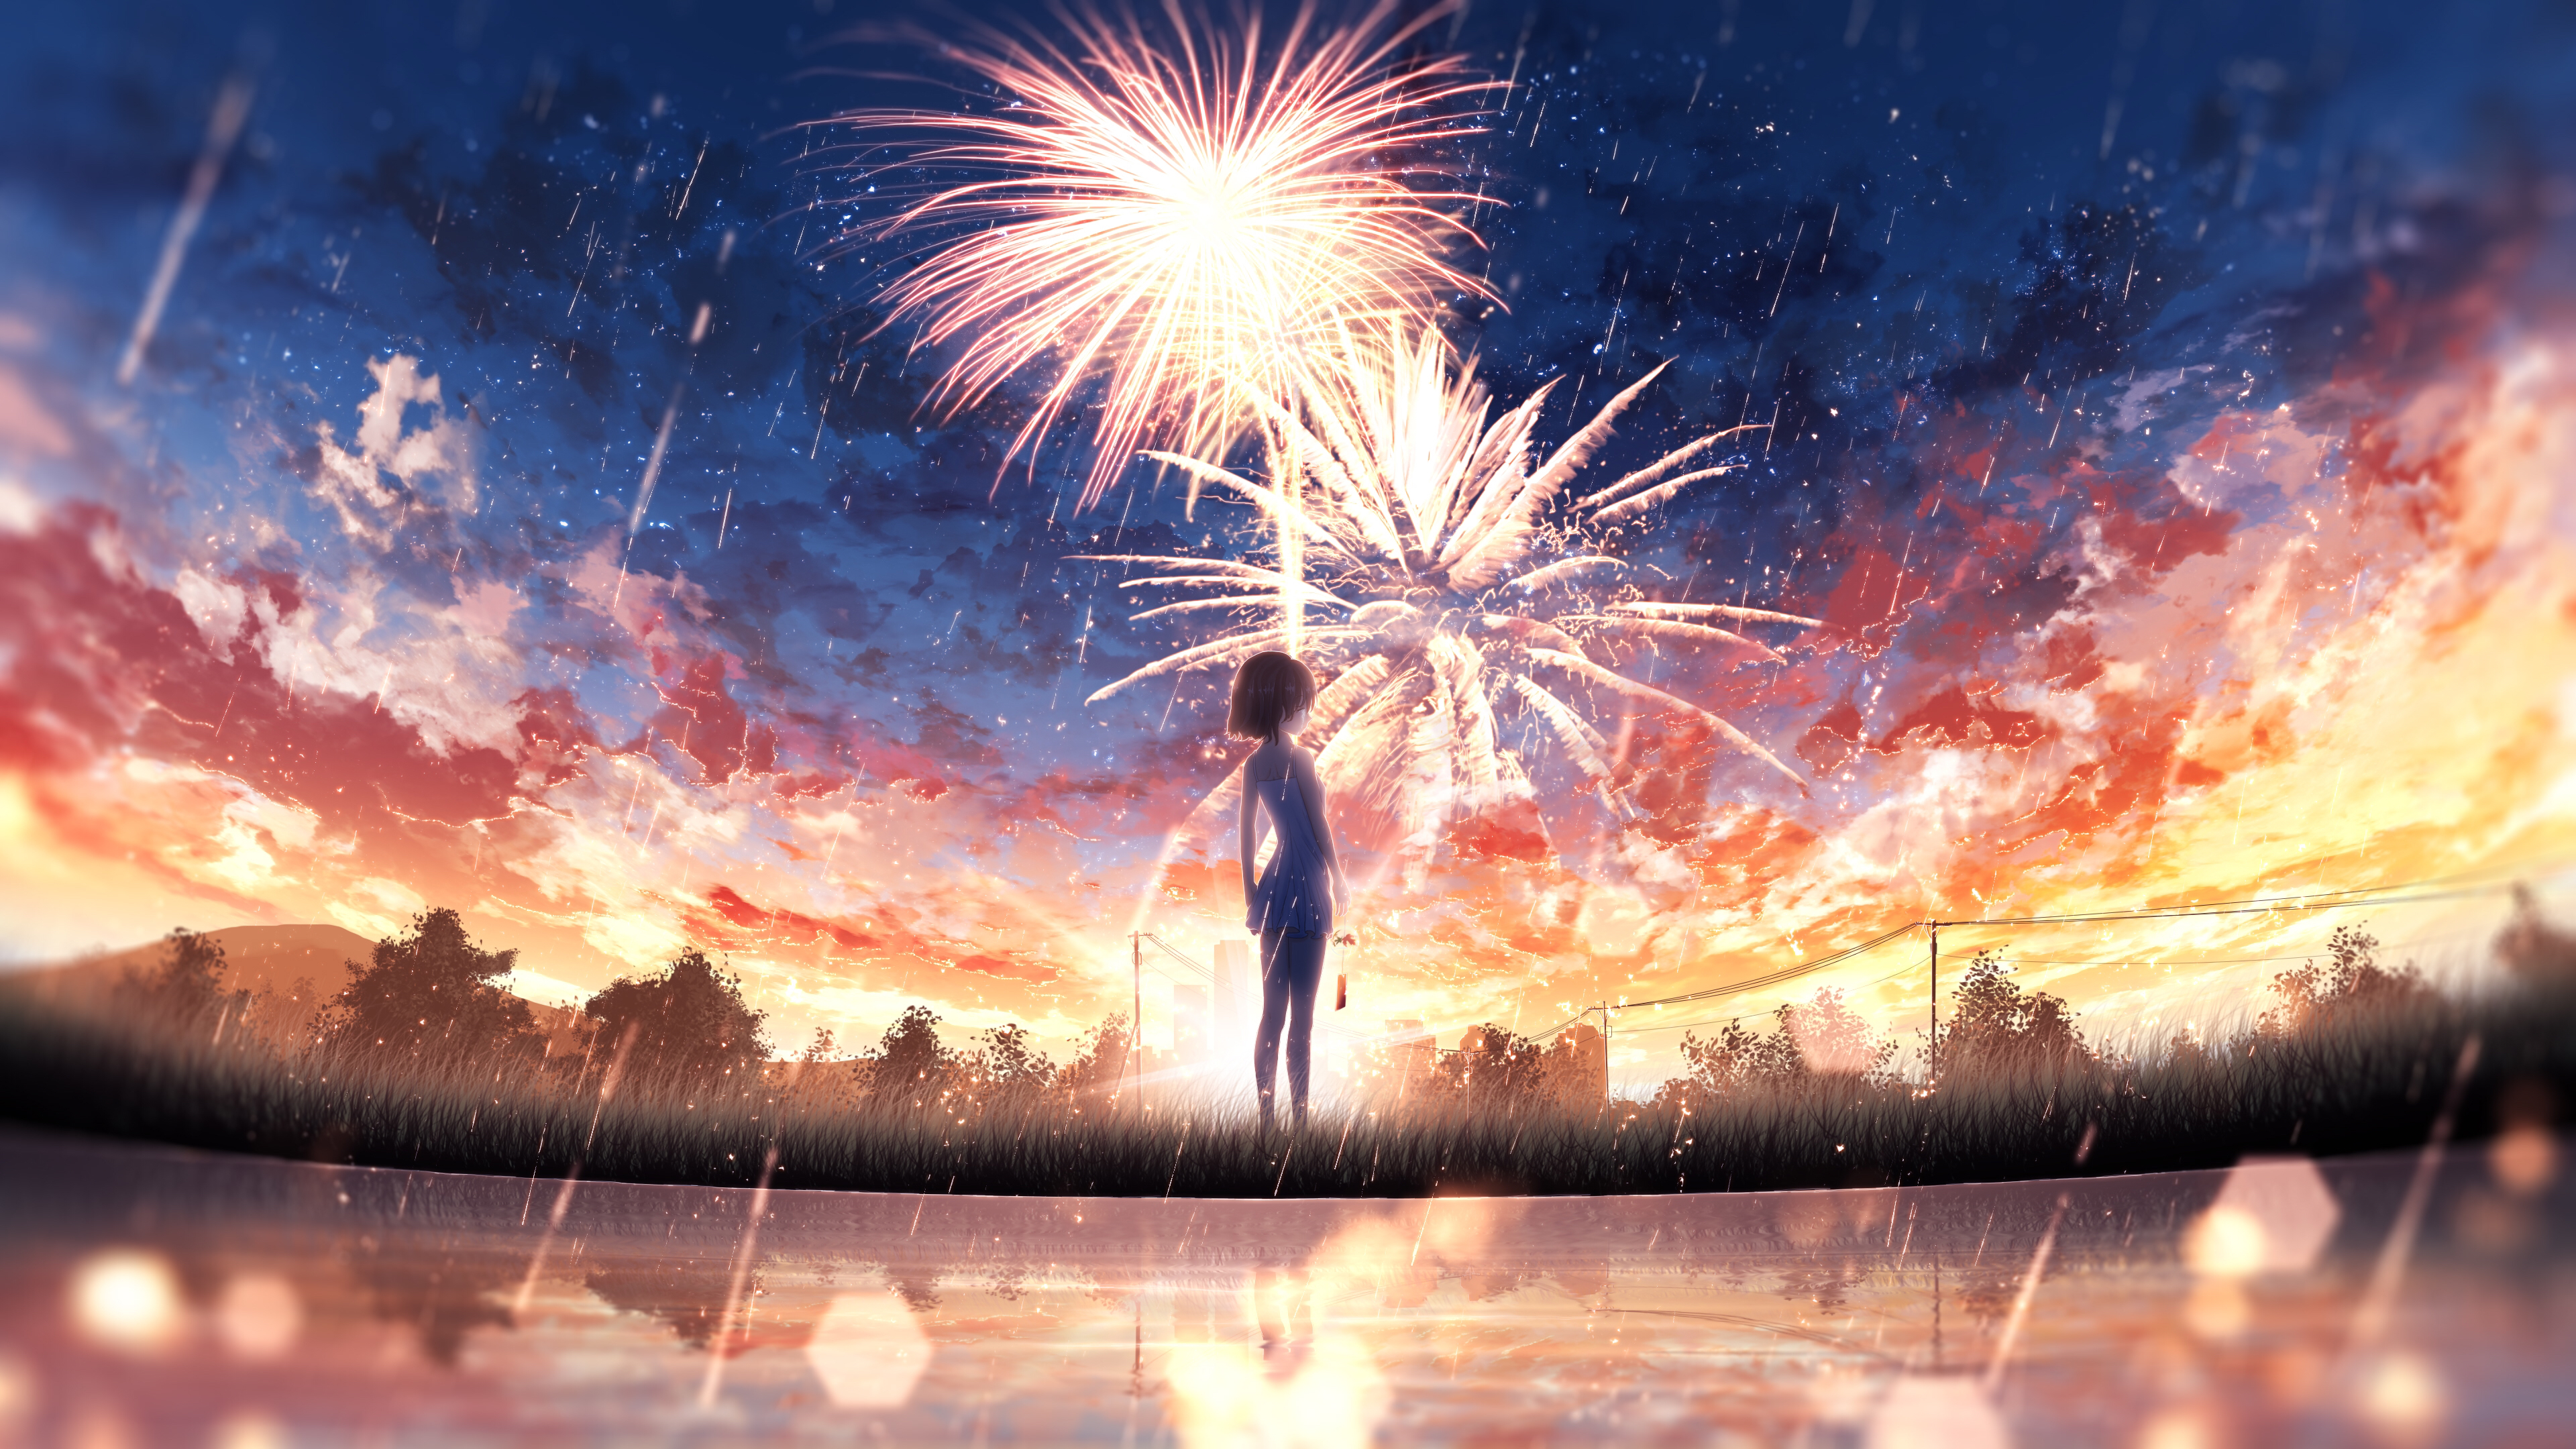 Anime 3840x2160 anime anime girls women fantasy girl digital art artwork illustration environment concept art landscape sky skyscape water sea reflection nature outdoors Sun sunlight trees fireworks wind wind chimes sad crying woman crying dress tears clouds lights